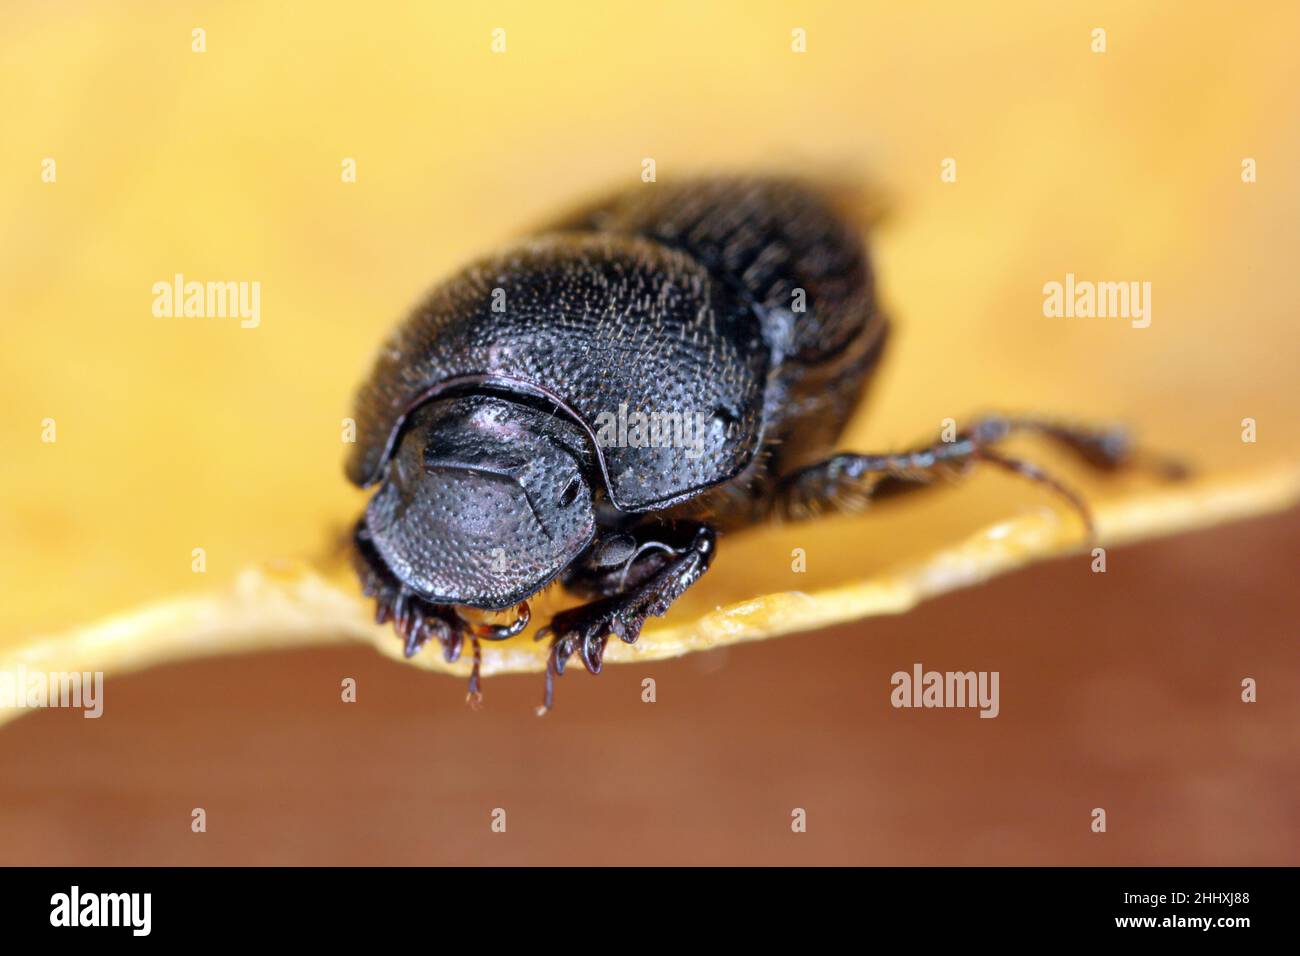 Onthophagus ovatus dung beetle. Small dung beetle in the family Scarabaeidae. These insects feed on animal feces. Stock Photo